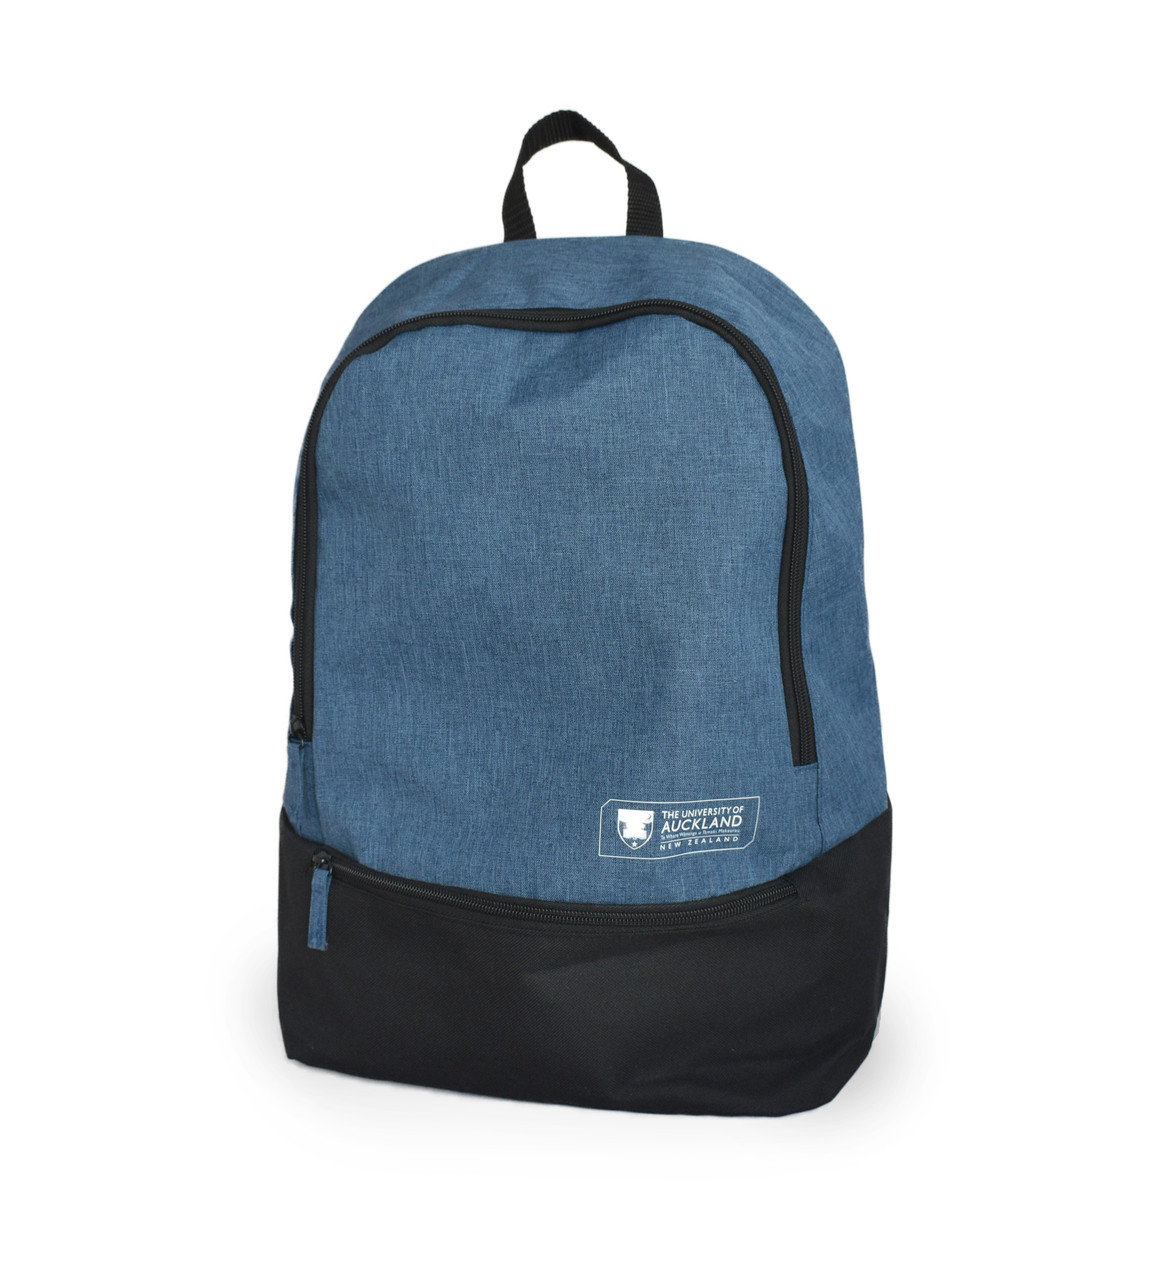 UoA Backpack - Campus Store